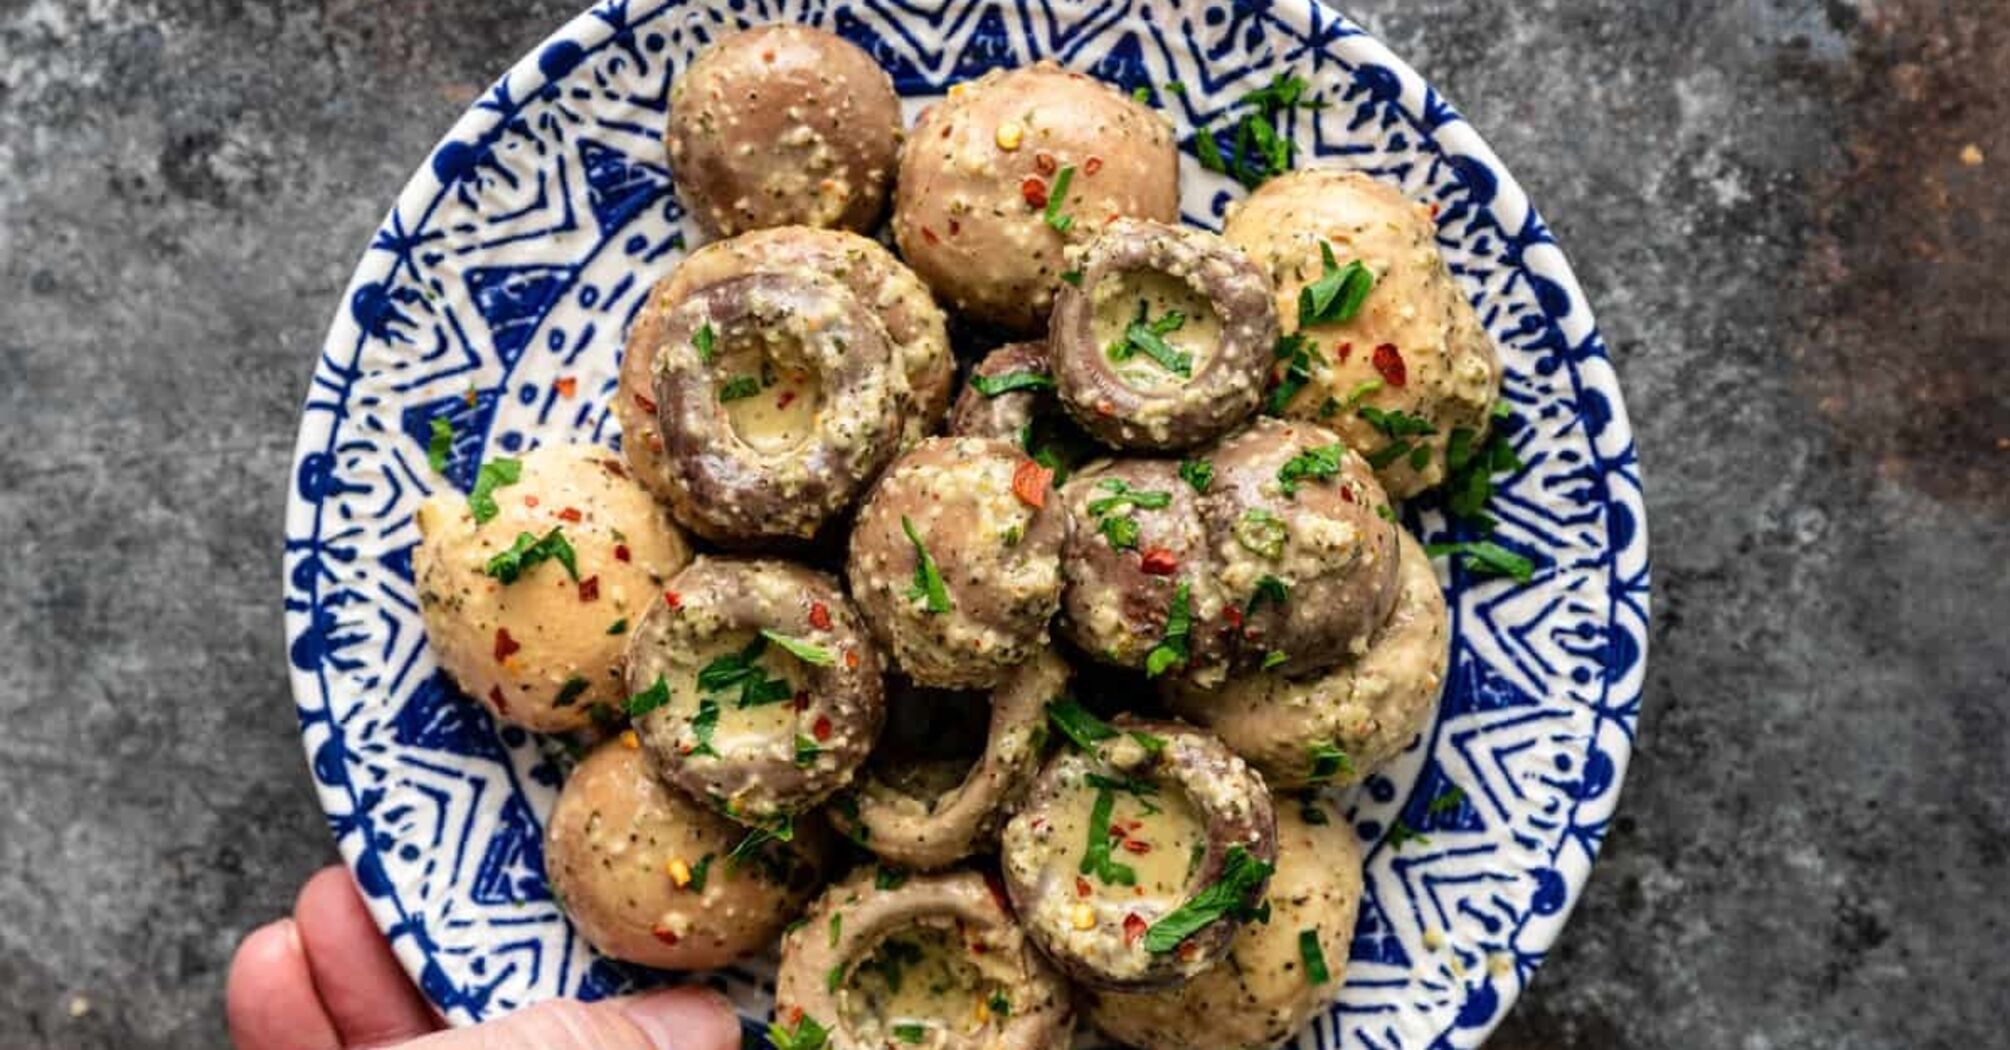 Simple baked mushrooms in 20 minutes: what to marinate them in